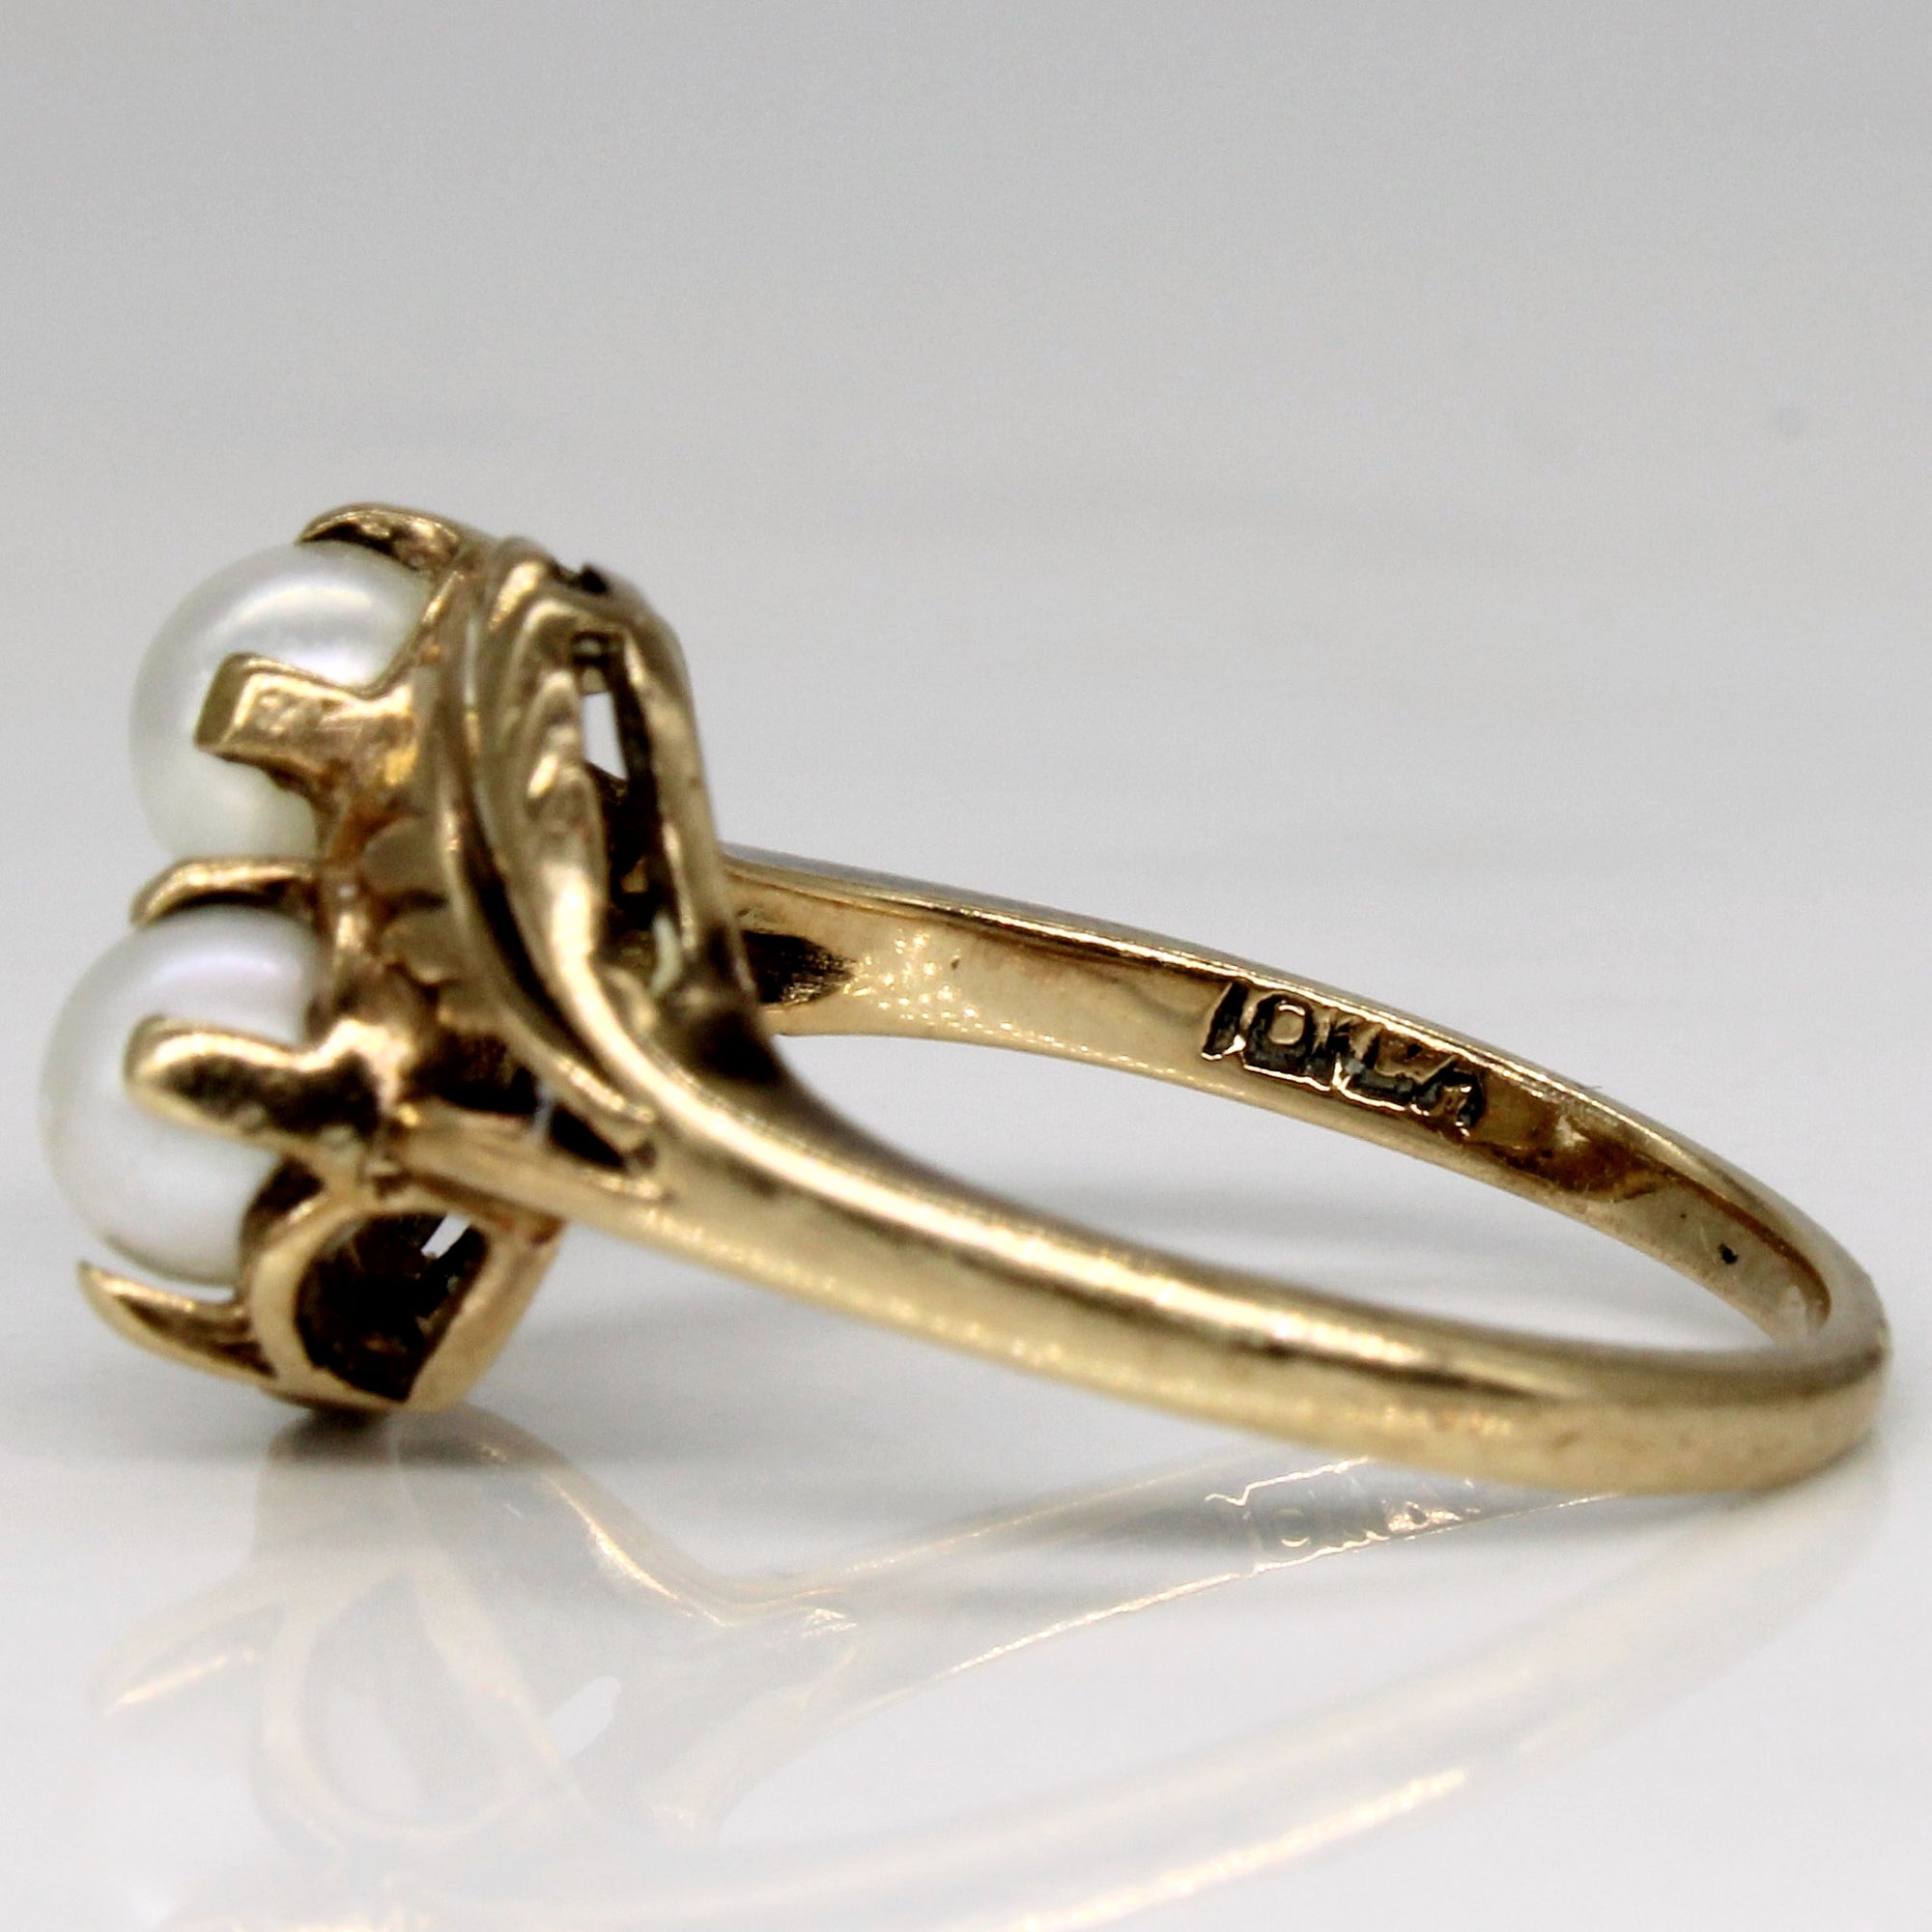 Leaf Detailed Pearl Bypass Ring | SZ 6 |